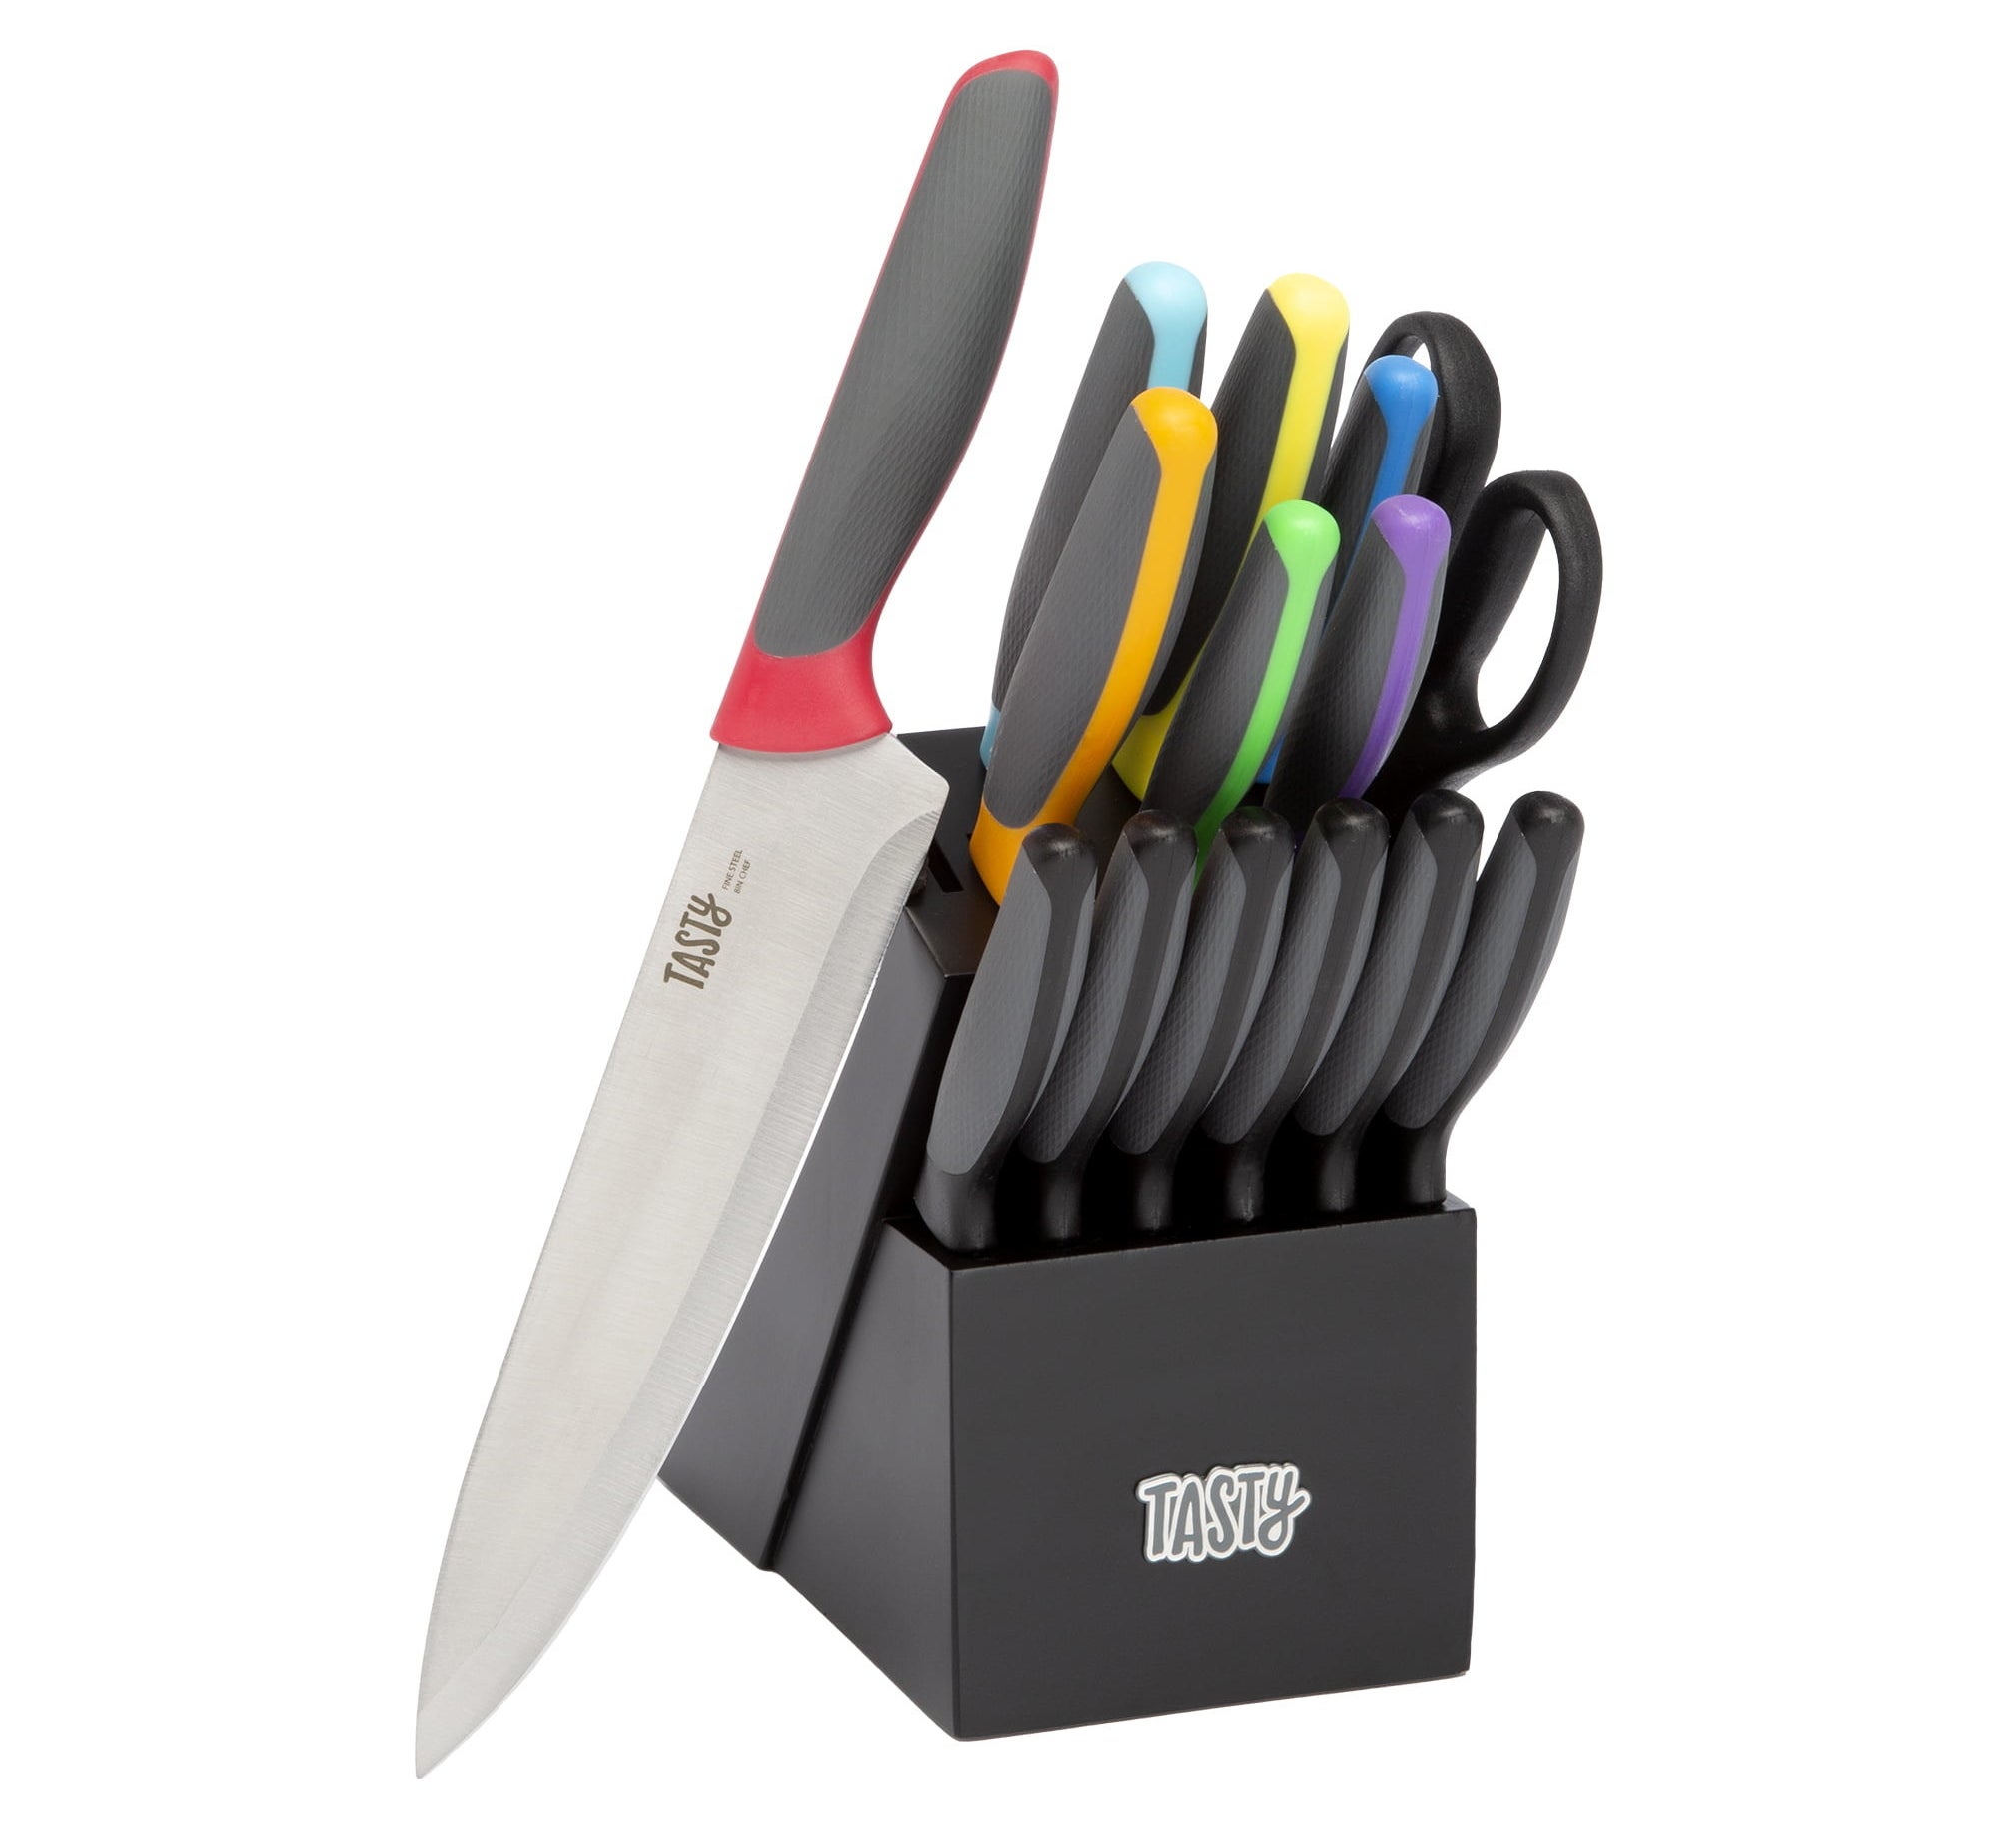 knife set with rainbow multicolored handles in a black tasty-branded knife block